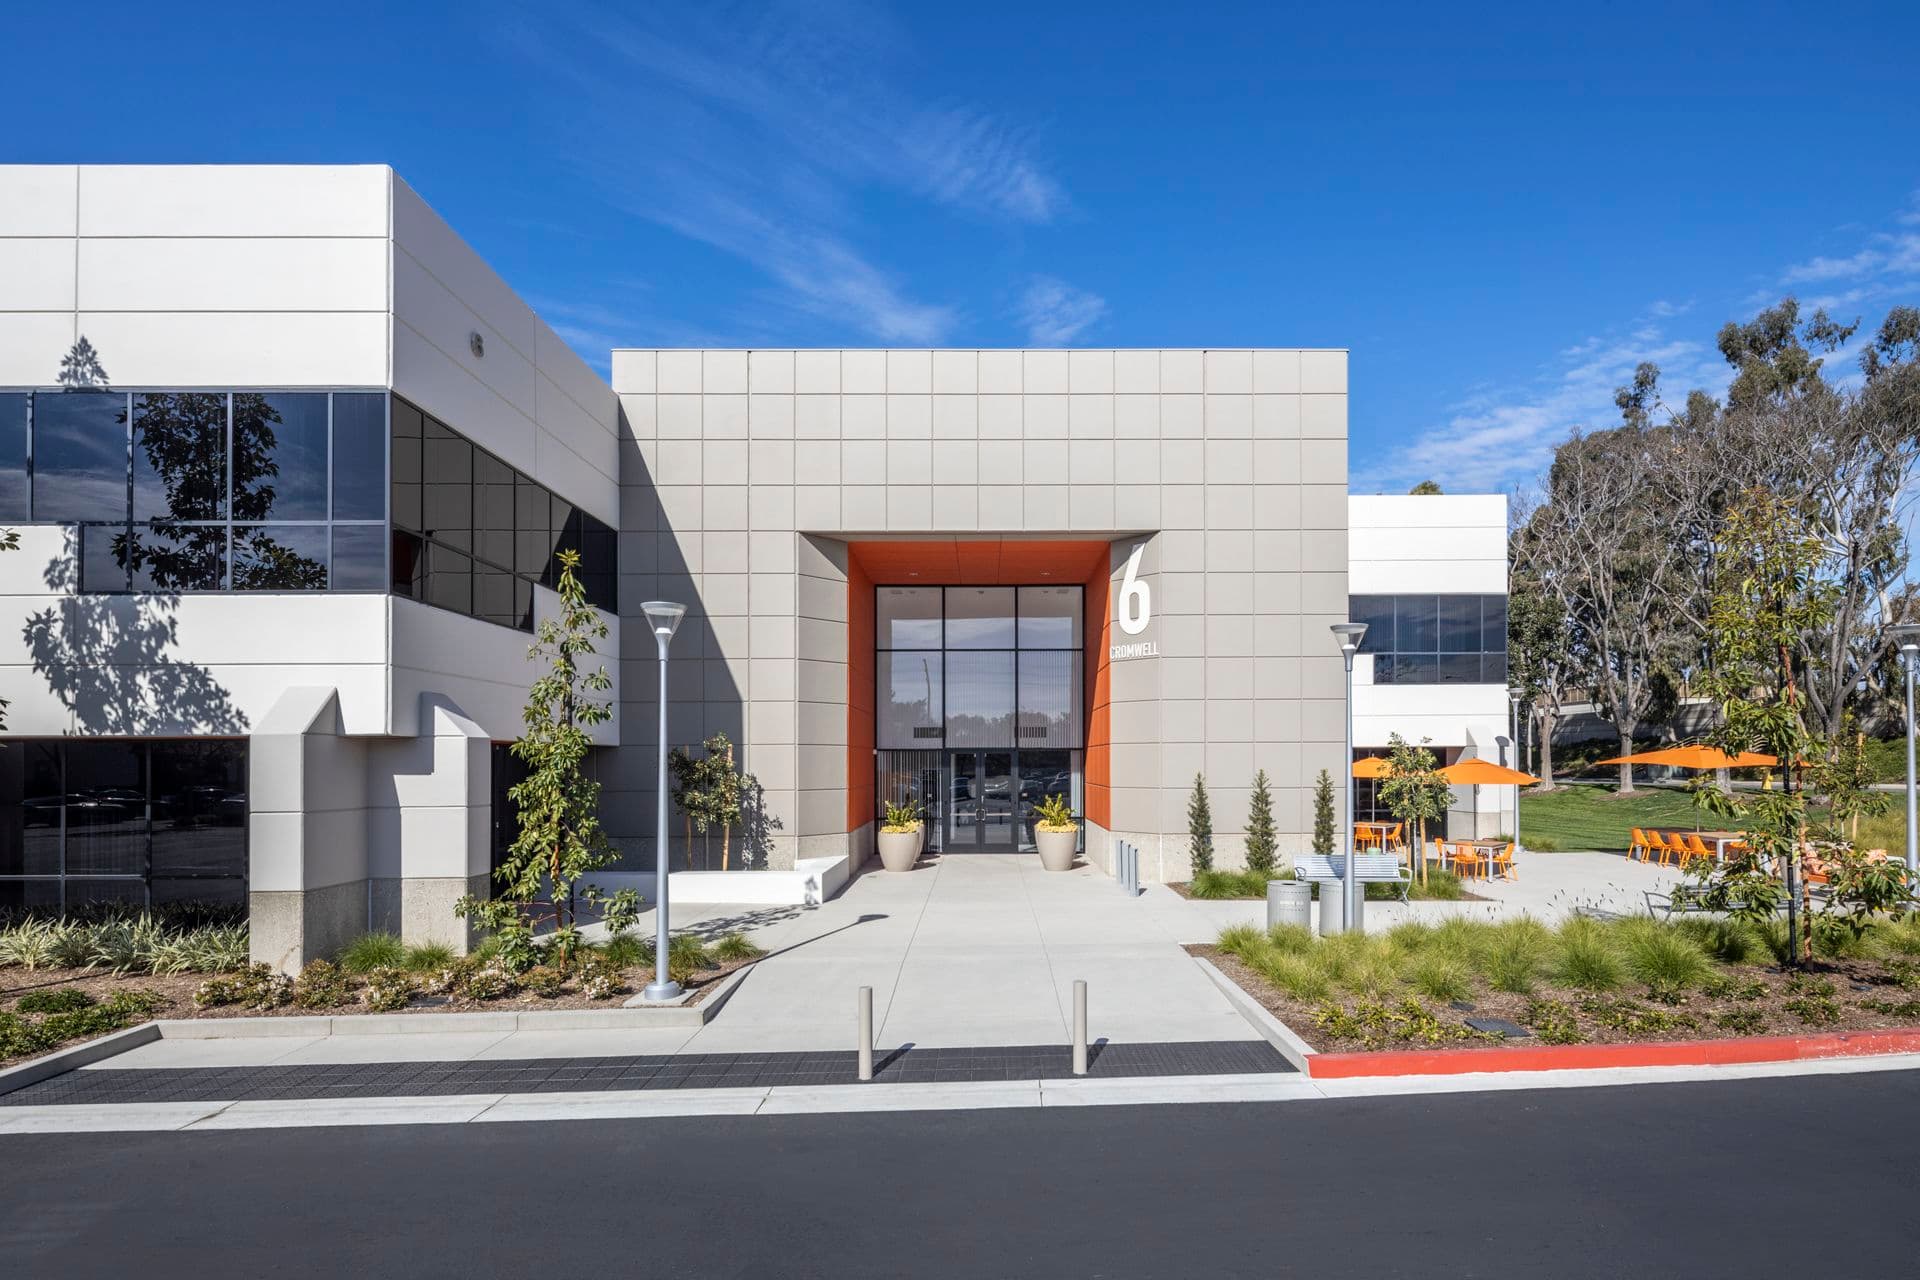 Exterior building photography for Bake Technology Park at 6 Cromwell, Irvine, CA